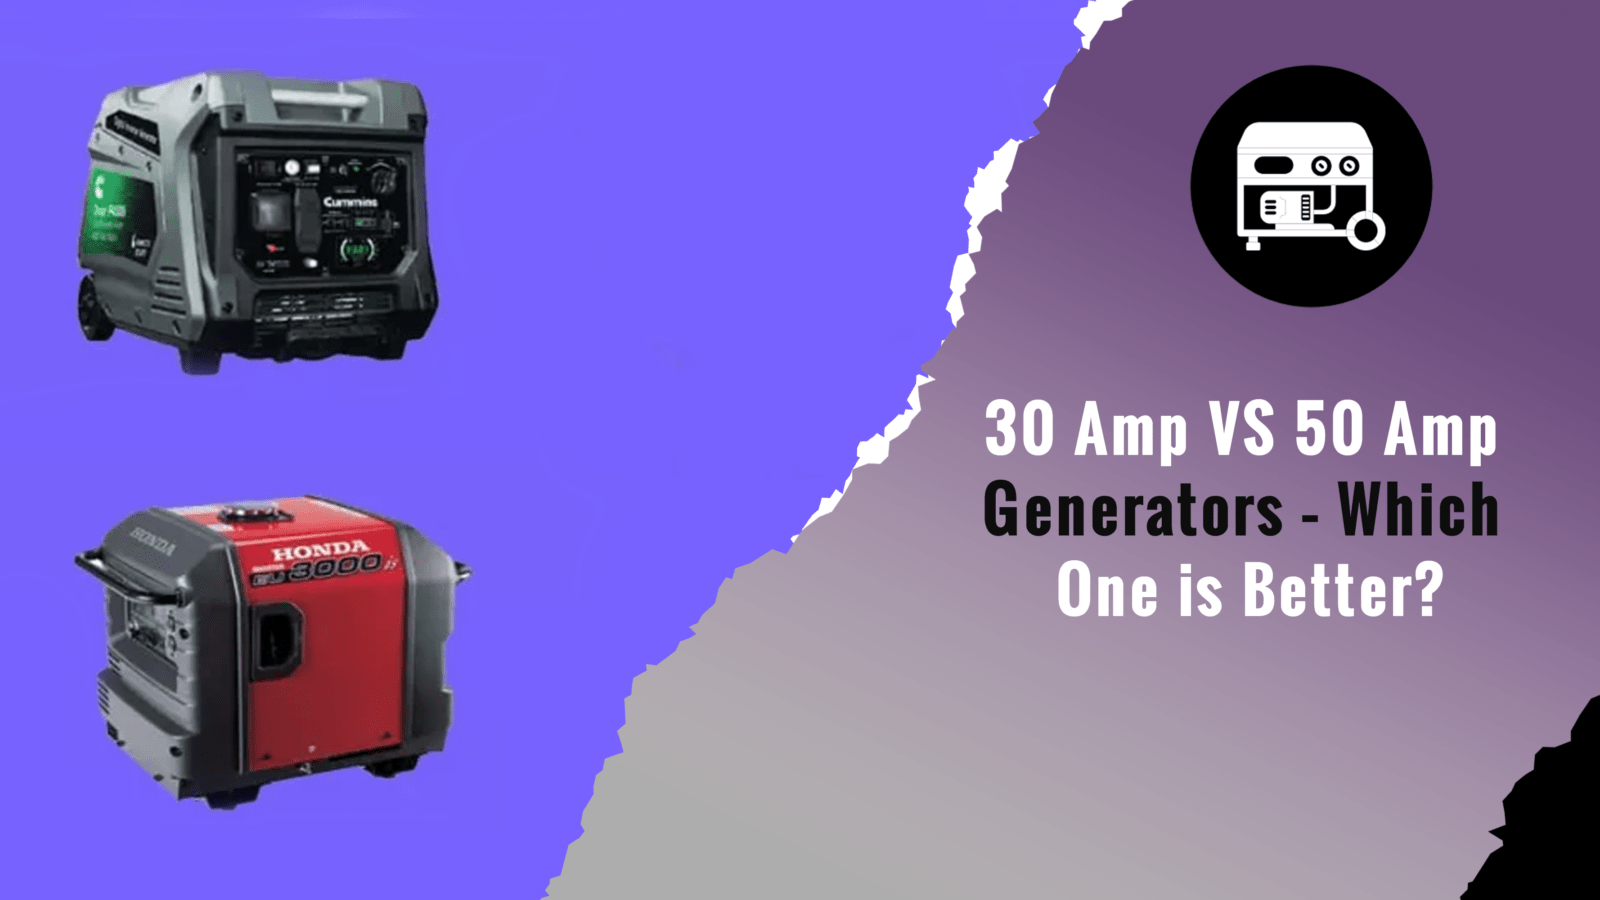 30 Amp VS 50 Amp Generators – Which One is Better